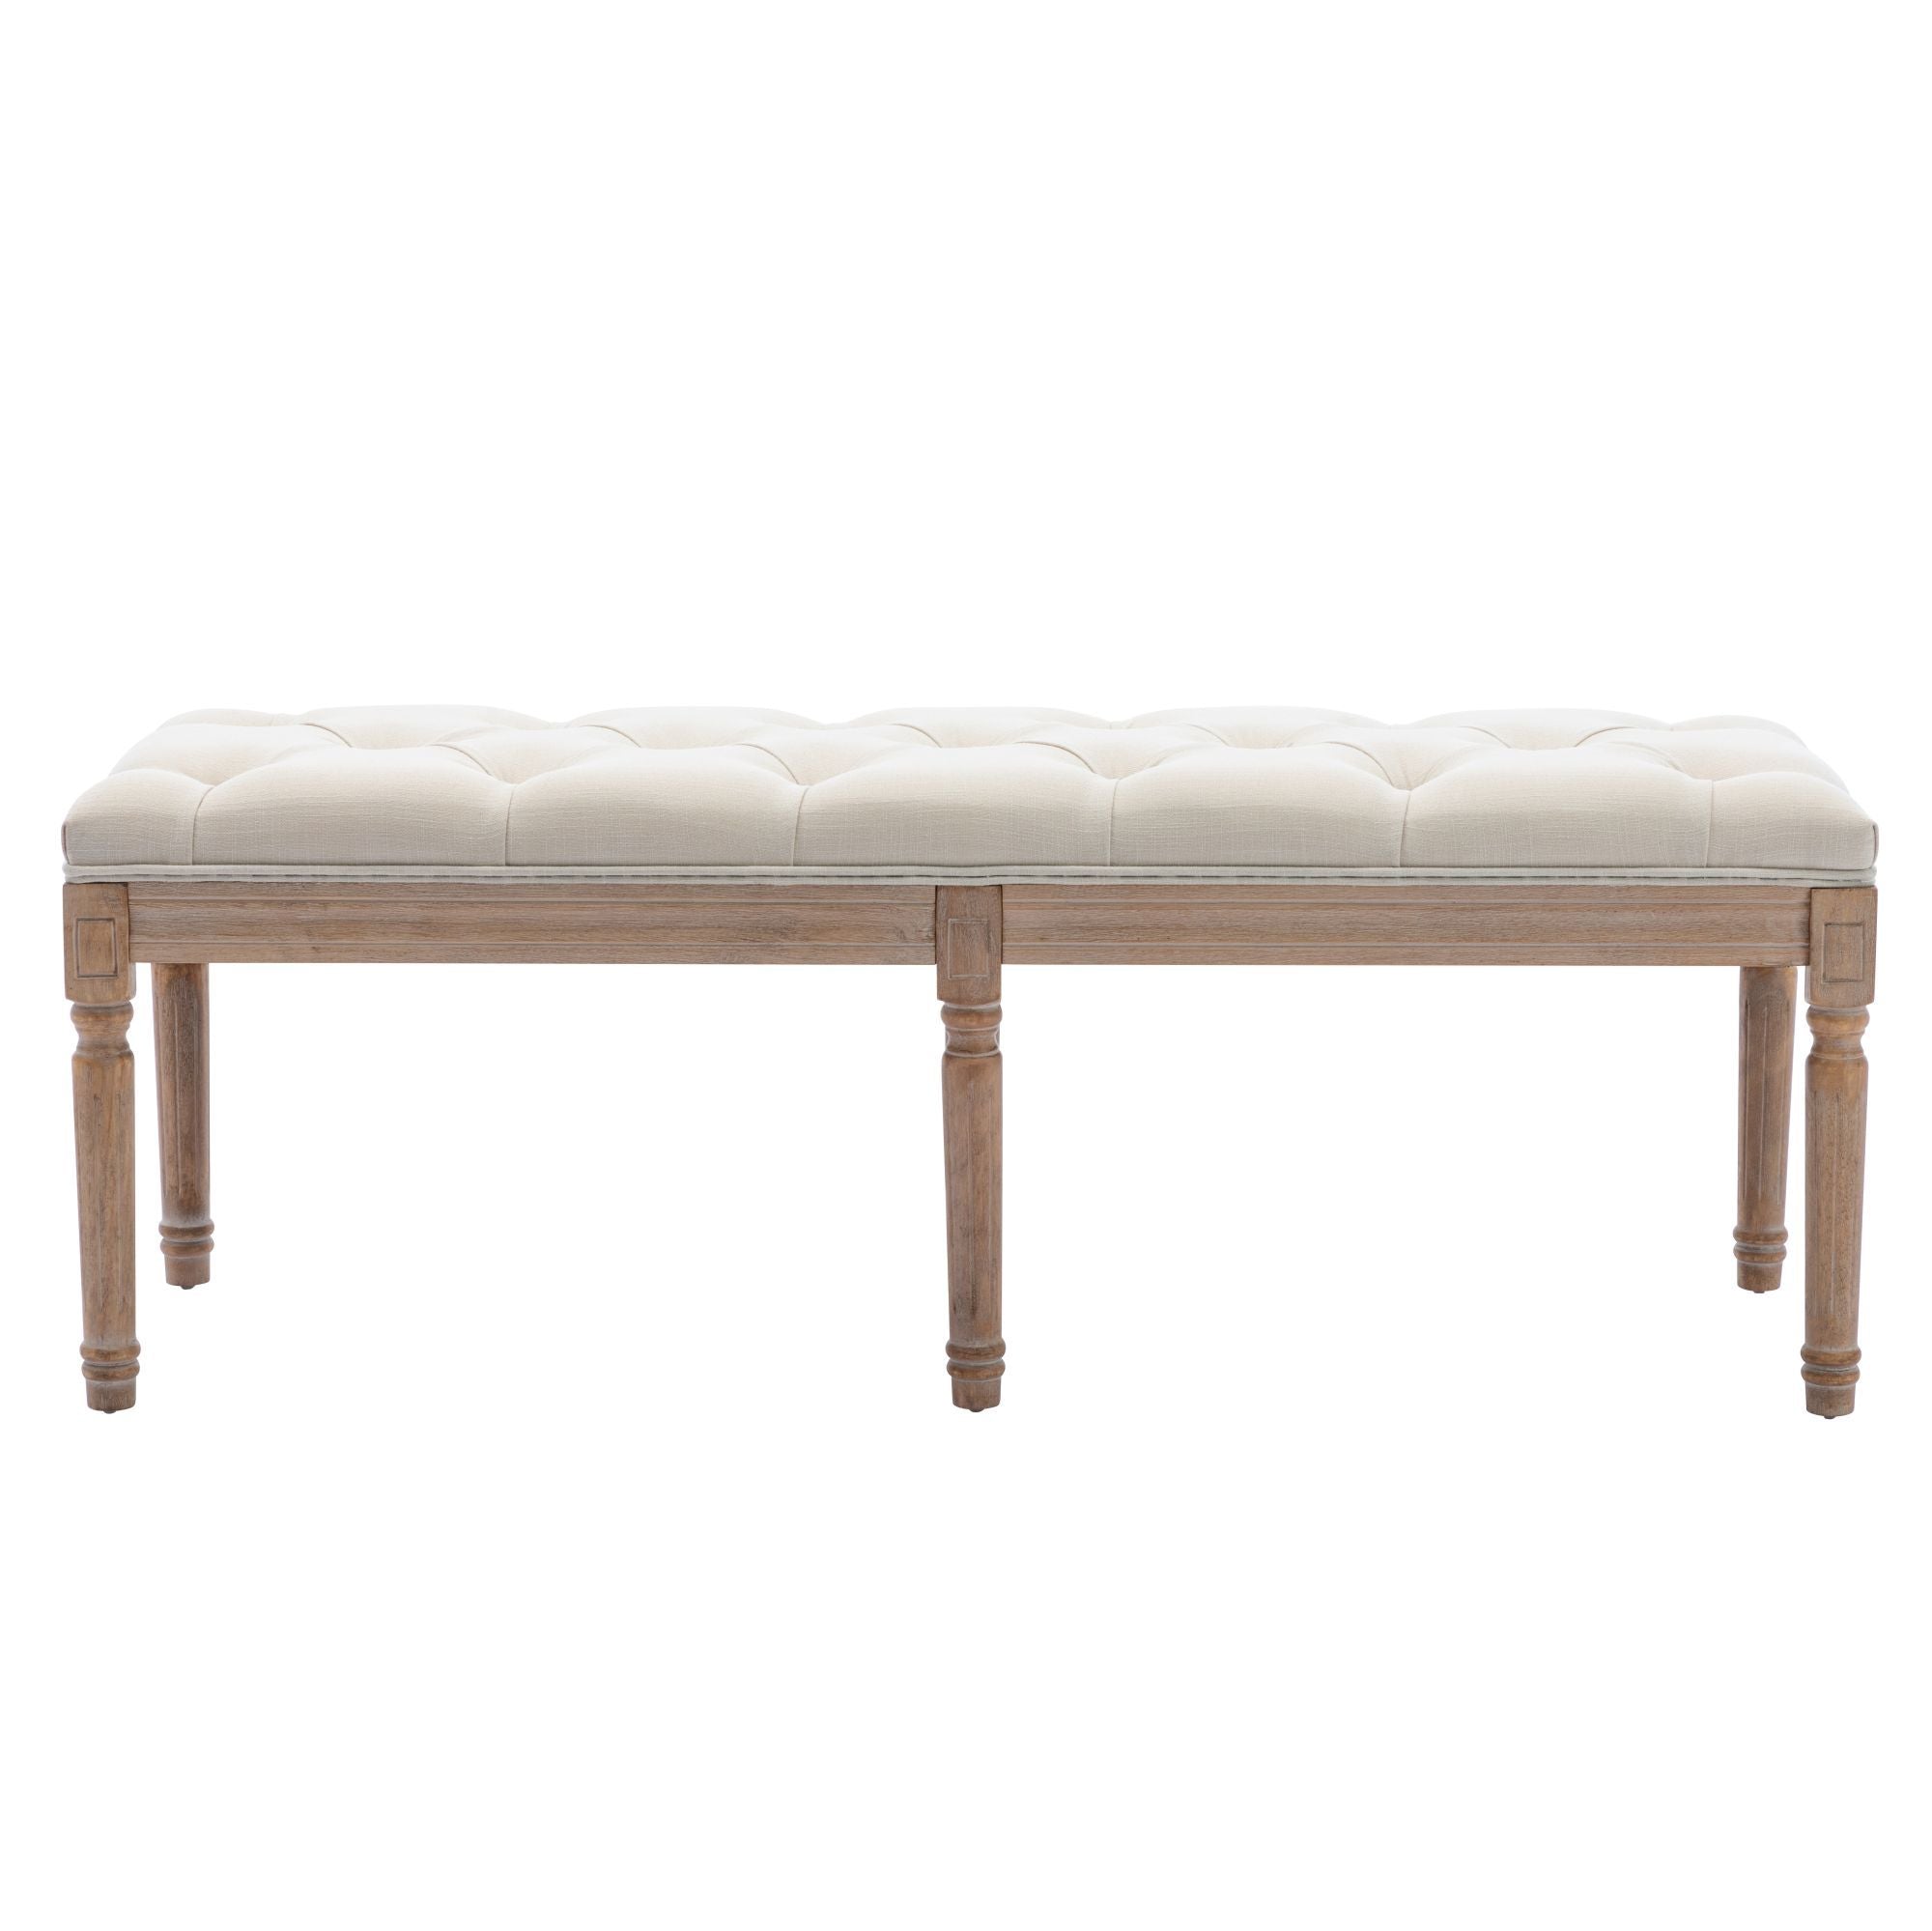 End of Bed Bench Upholstered Entryway Bench French Benchwith Rubberwood Legs for Bedroom/Entry/Hallway-Boyel Living